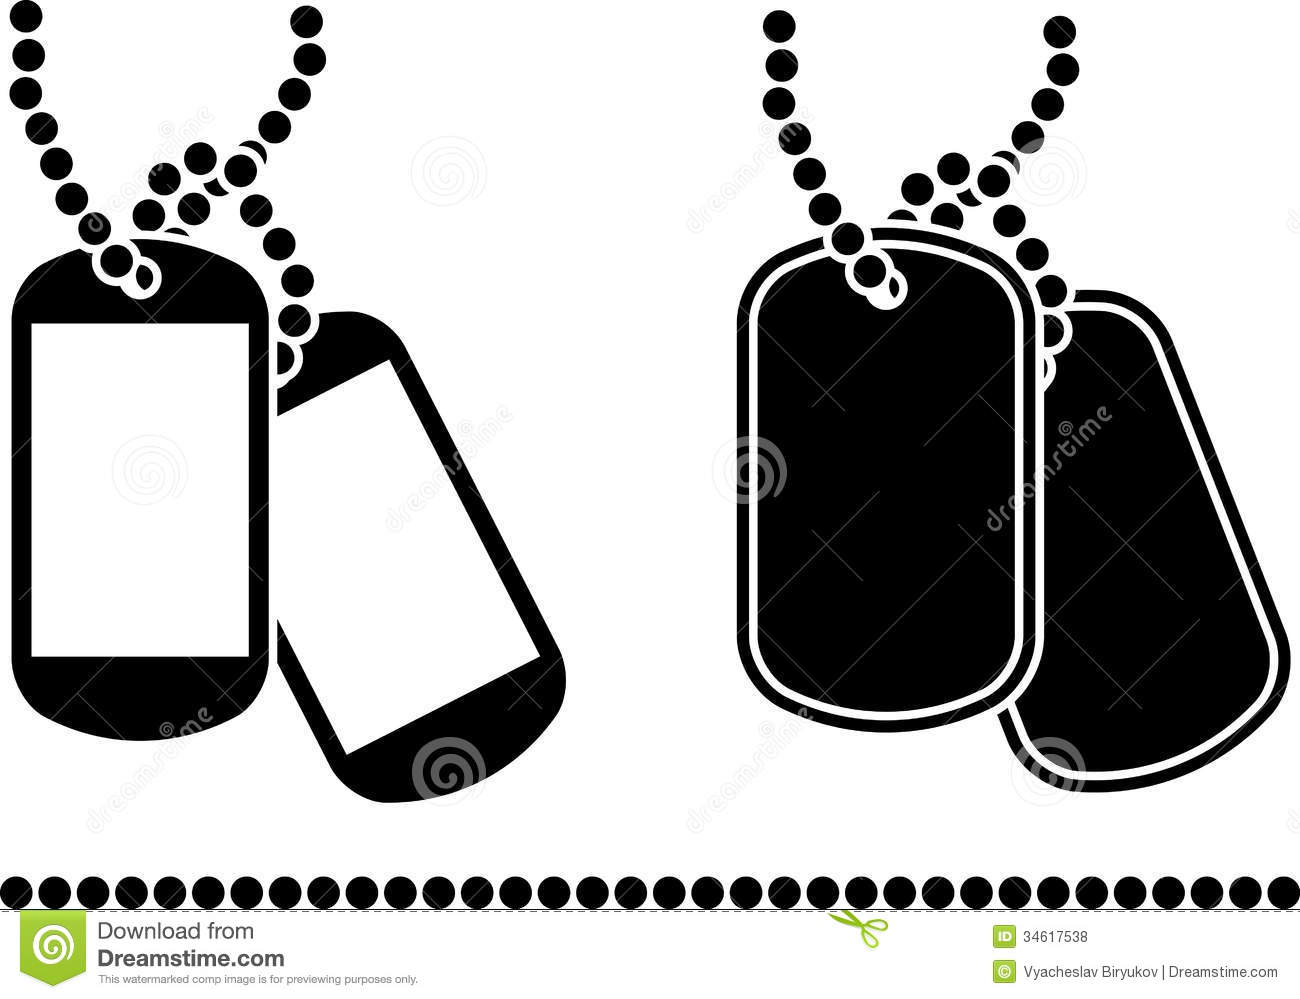 Stencils Of Dog Tags Royalty Free Stock Photos   Image  34617538